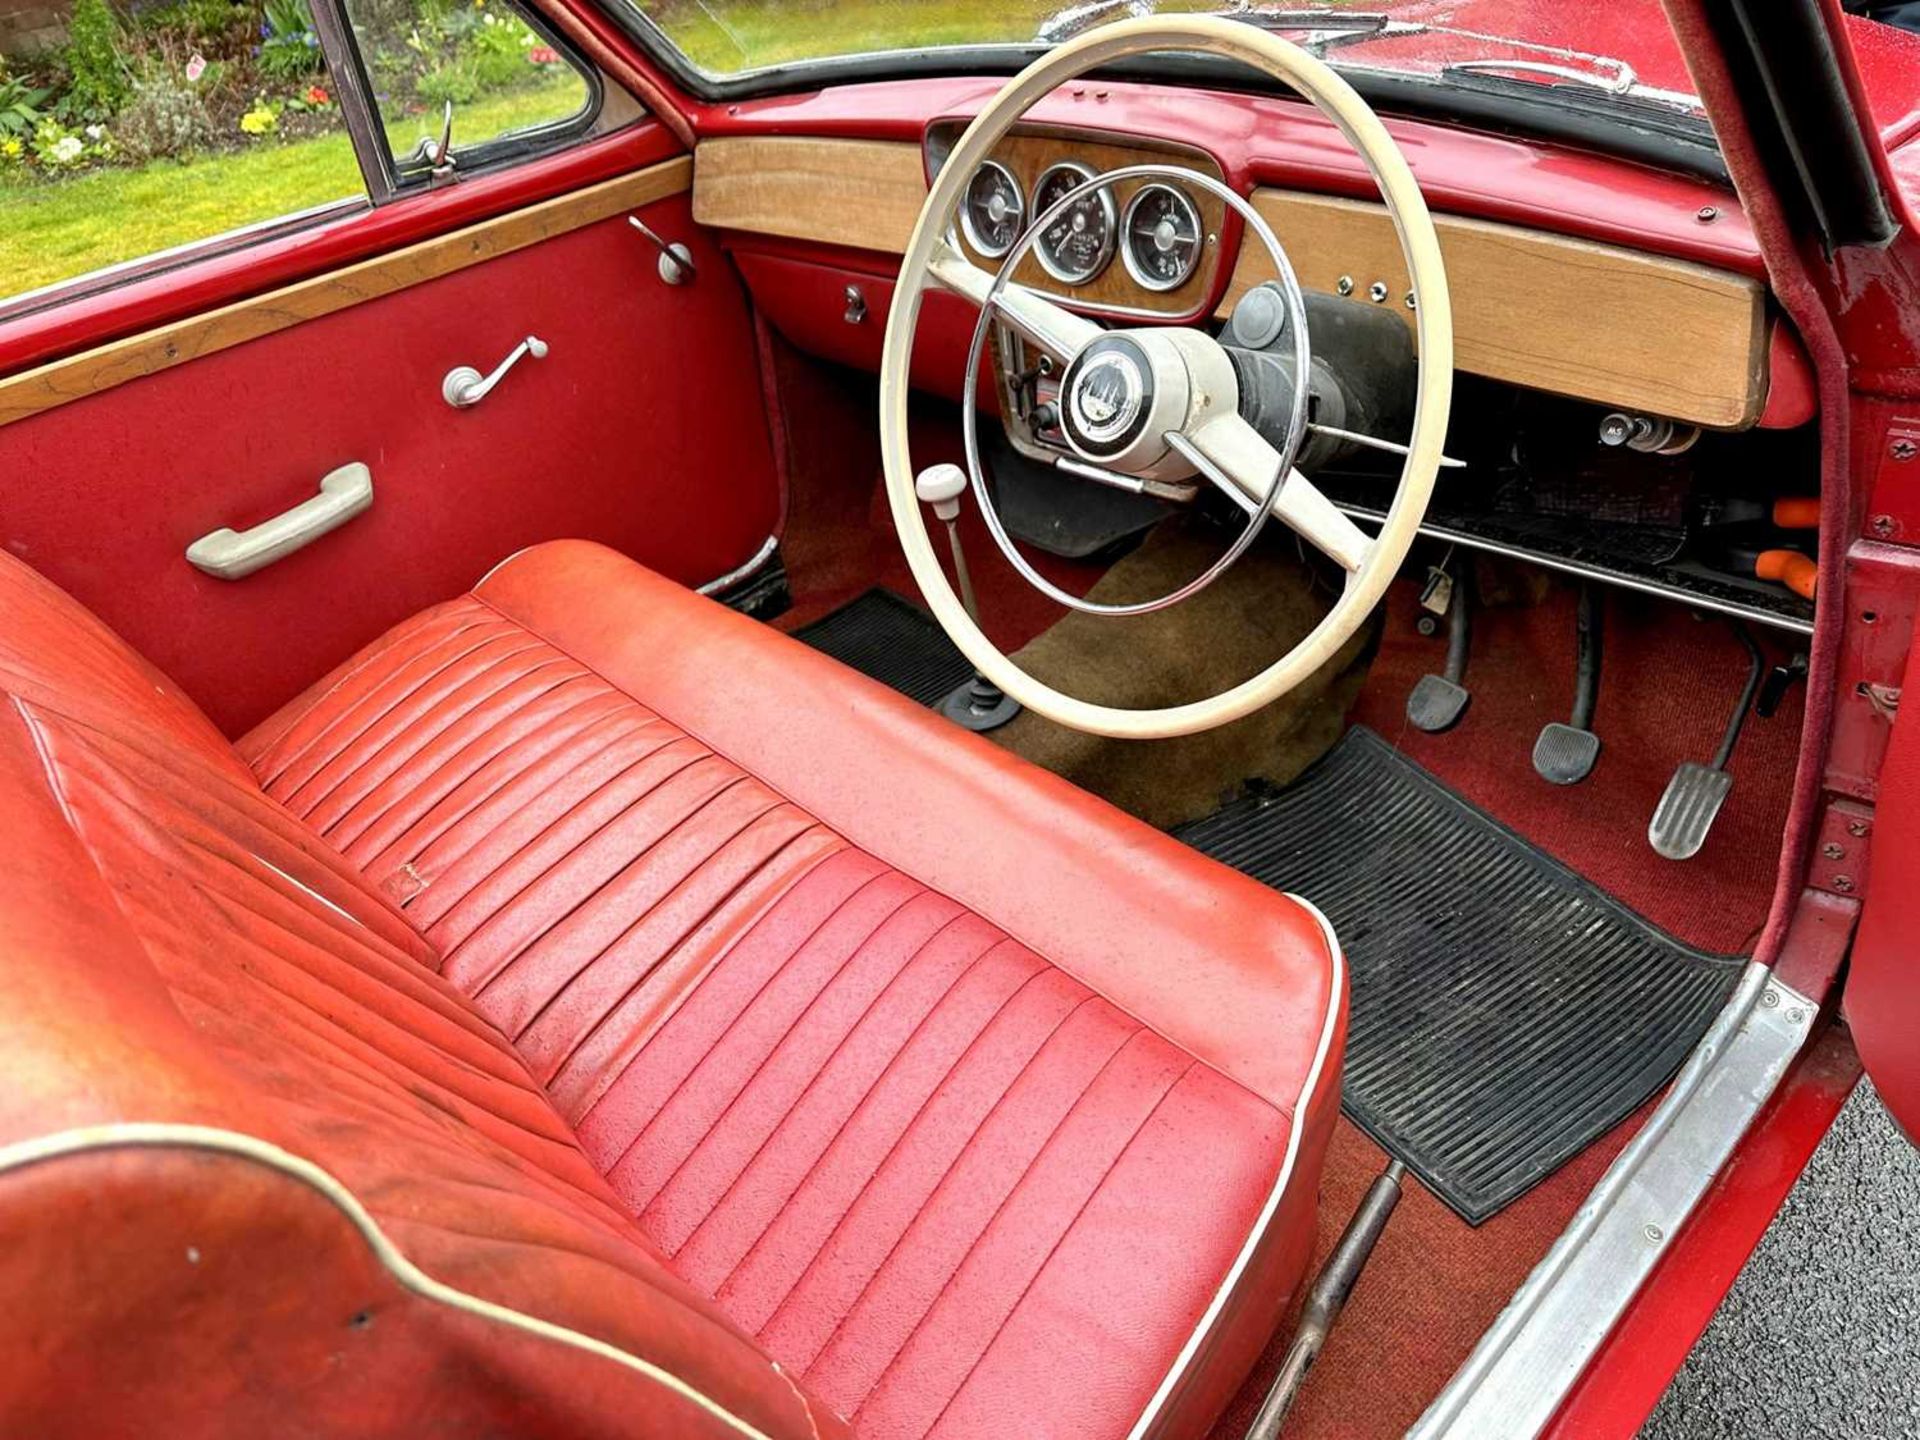 1961 Singer Gazelle Convertible Comes complete with overdrive, period radio and badge bar - Image 49 of 95